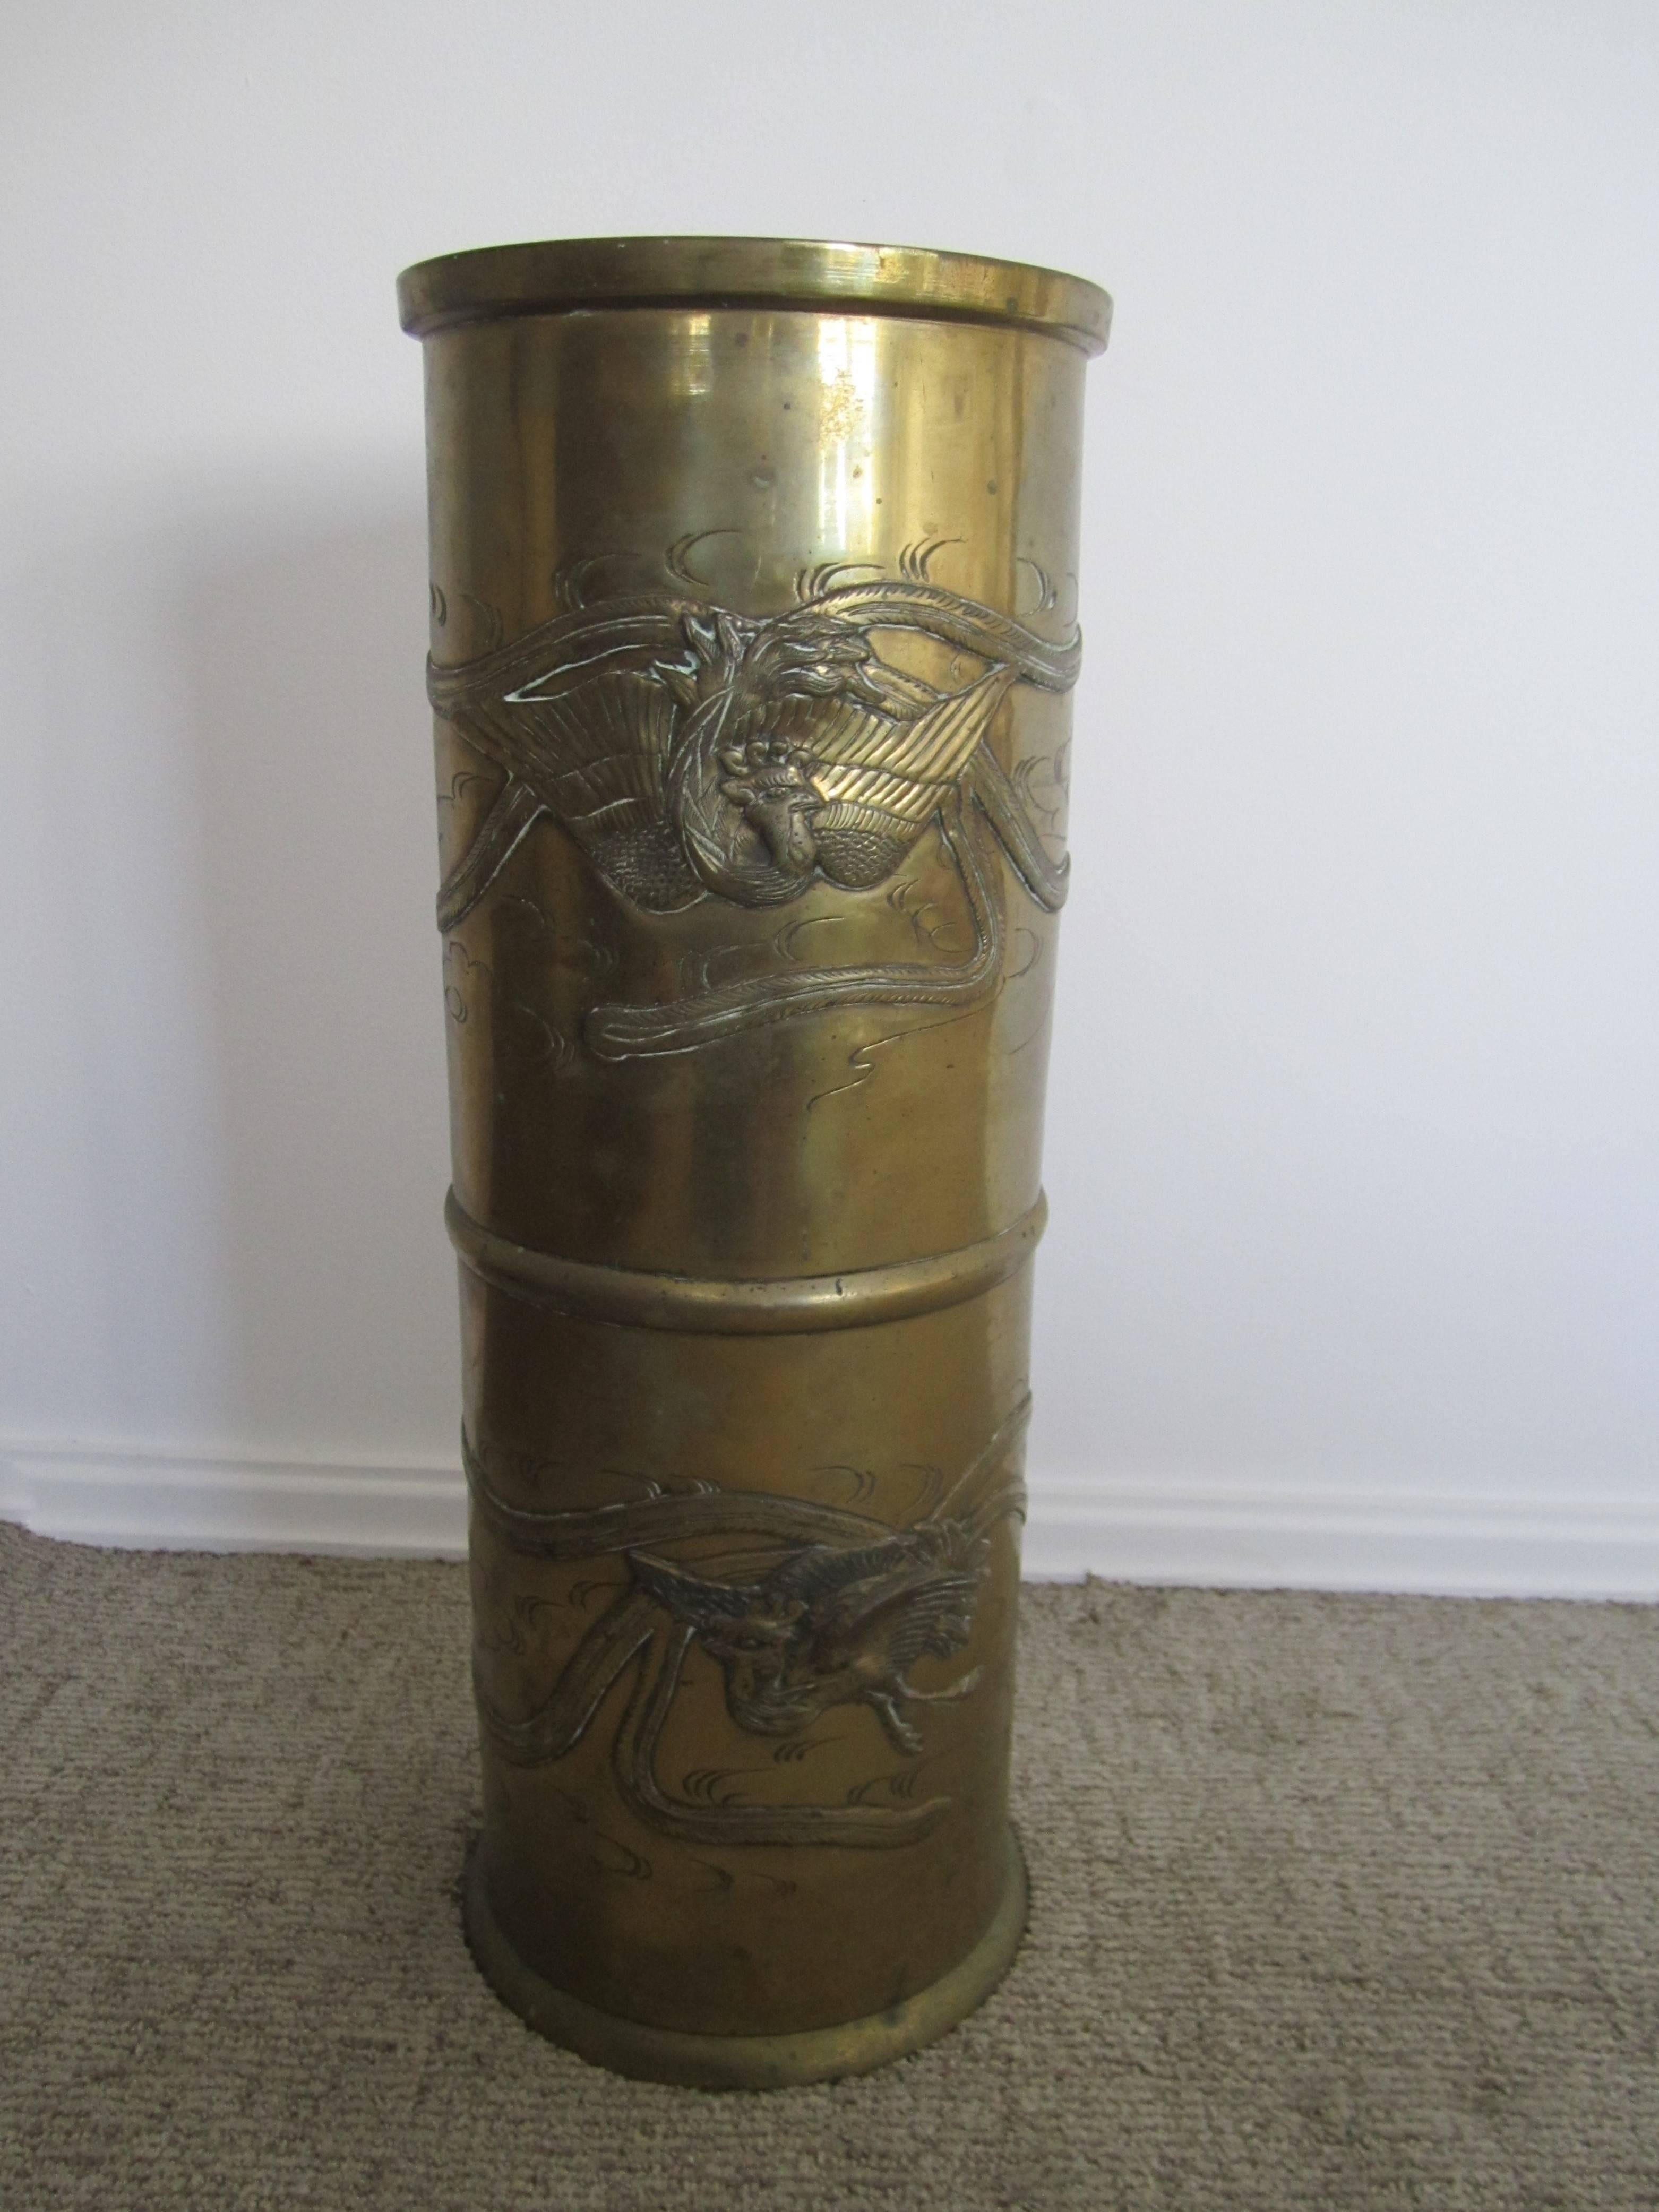 Substantial Brass Umbrella Stand with Embossed Decorative Detailing 1